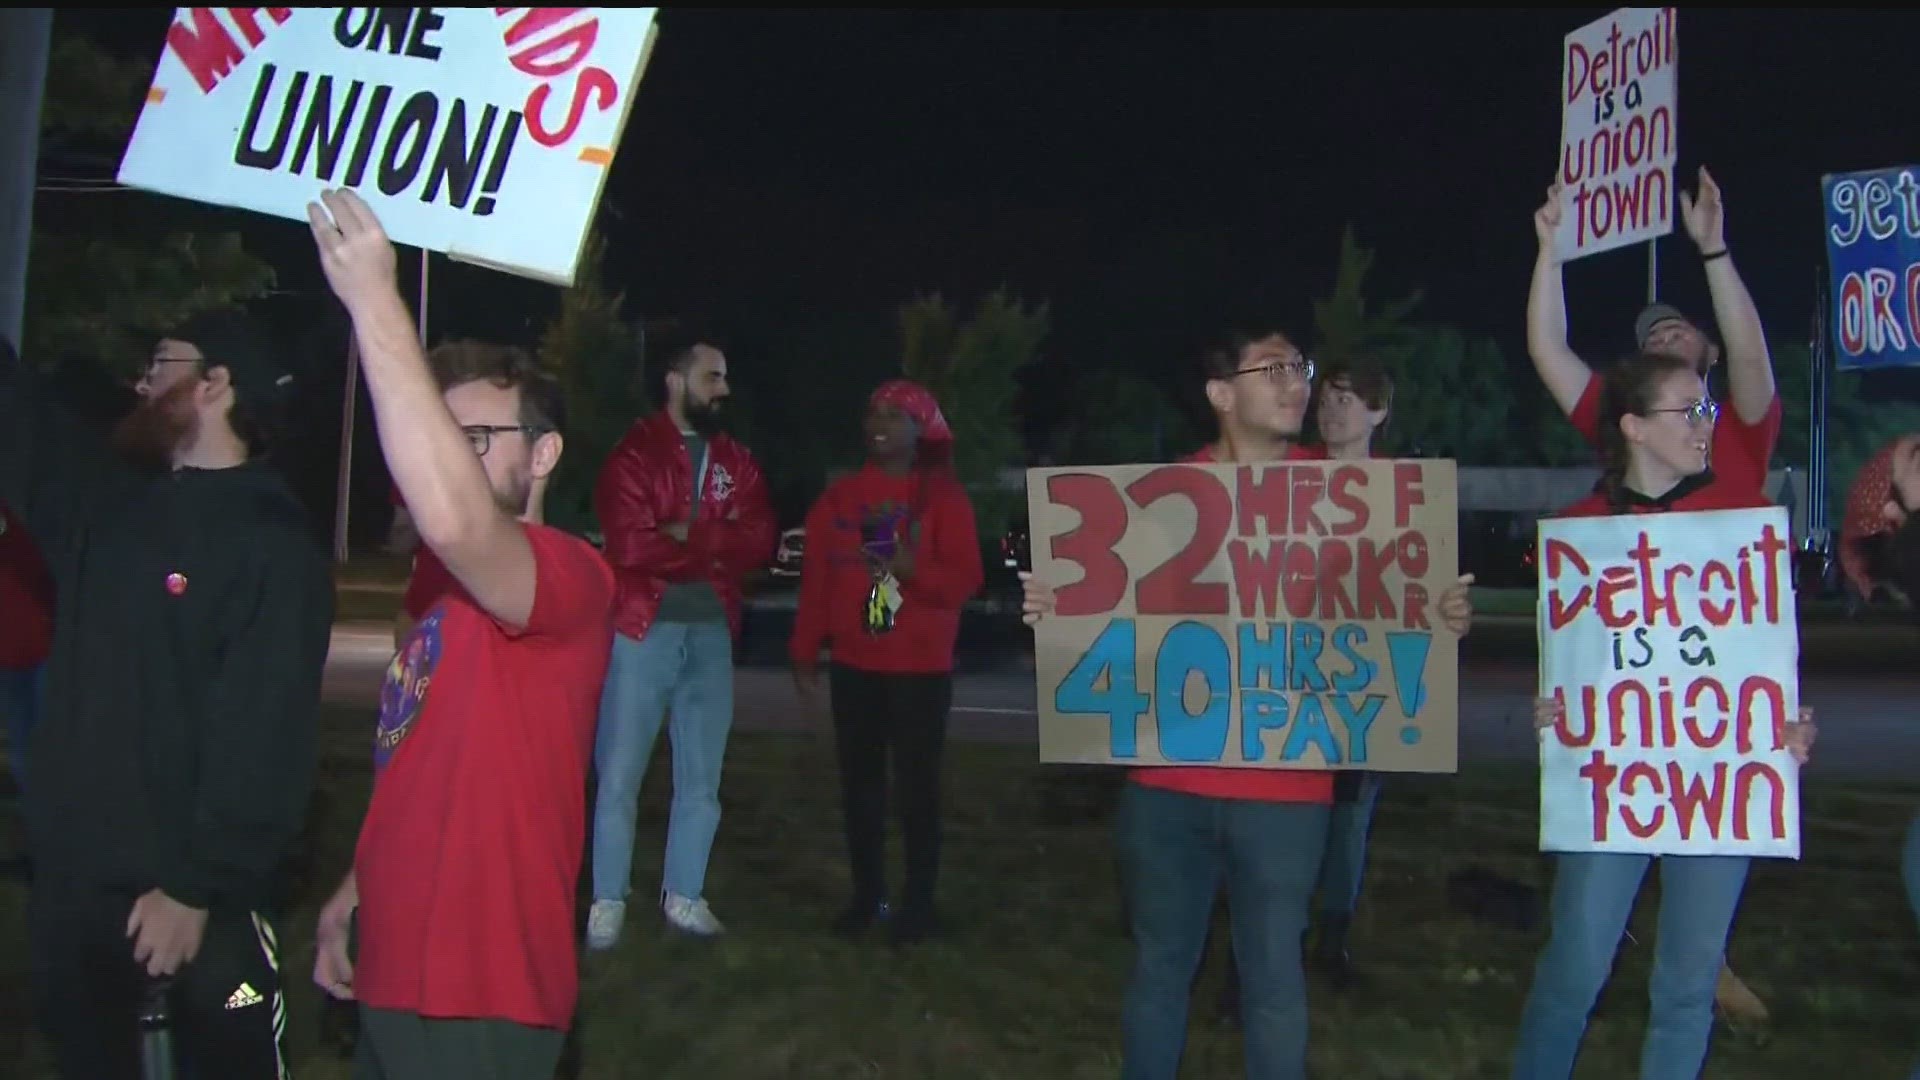 Members of the United Auto Workers union began picketing Friday at three locations across Michigan, Missouri and Ohio.